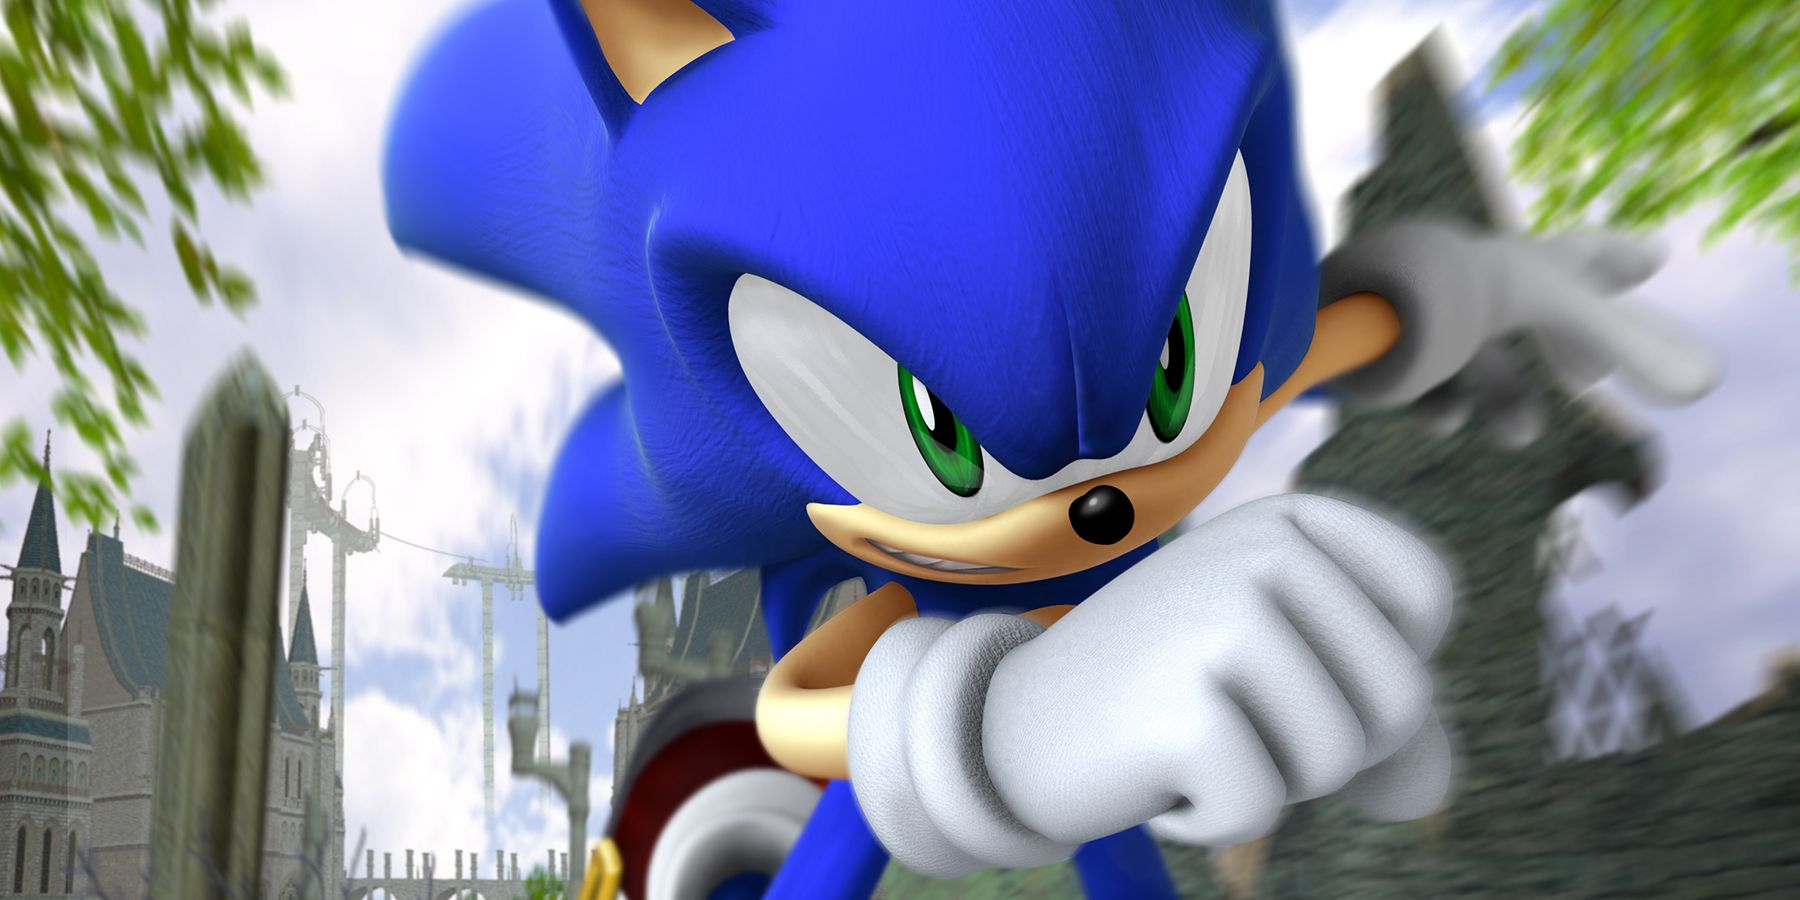 Even MORE Facts about Sonic Project 06! 